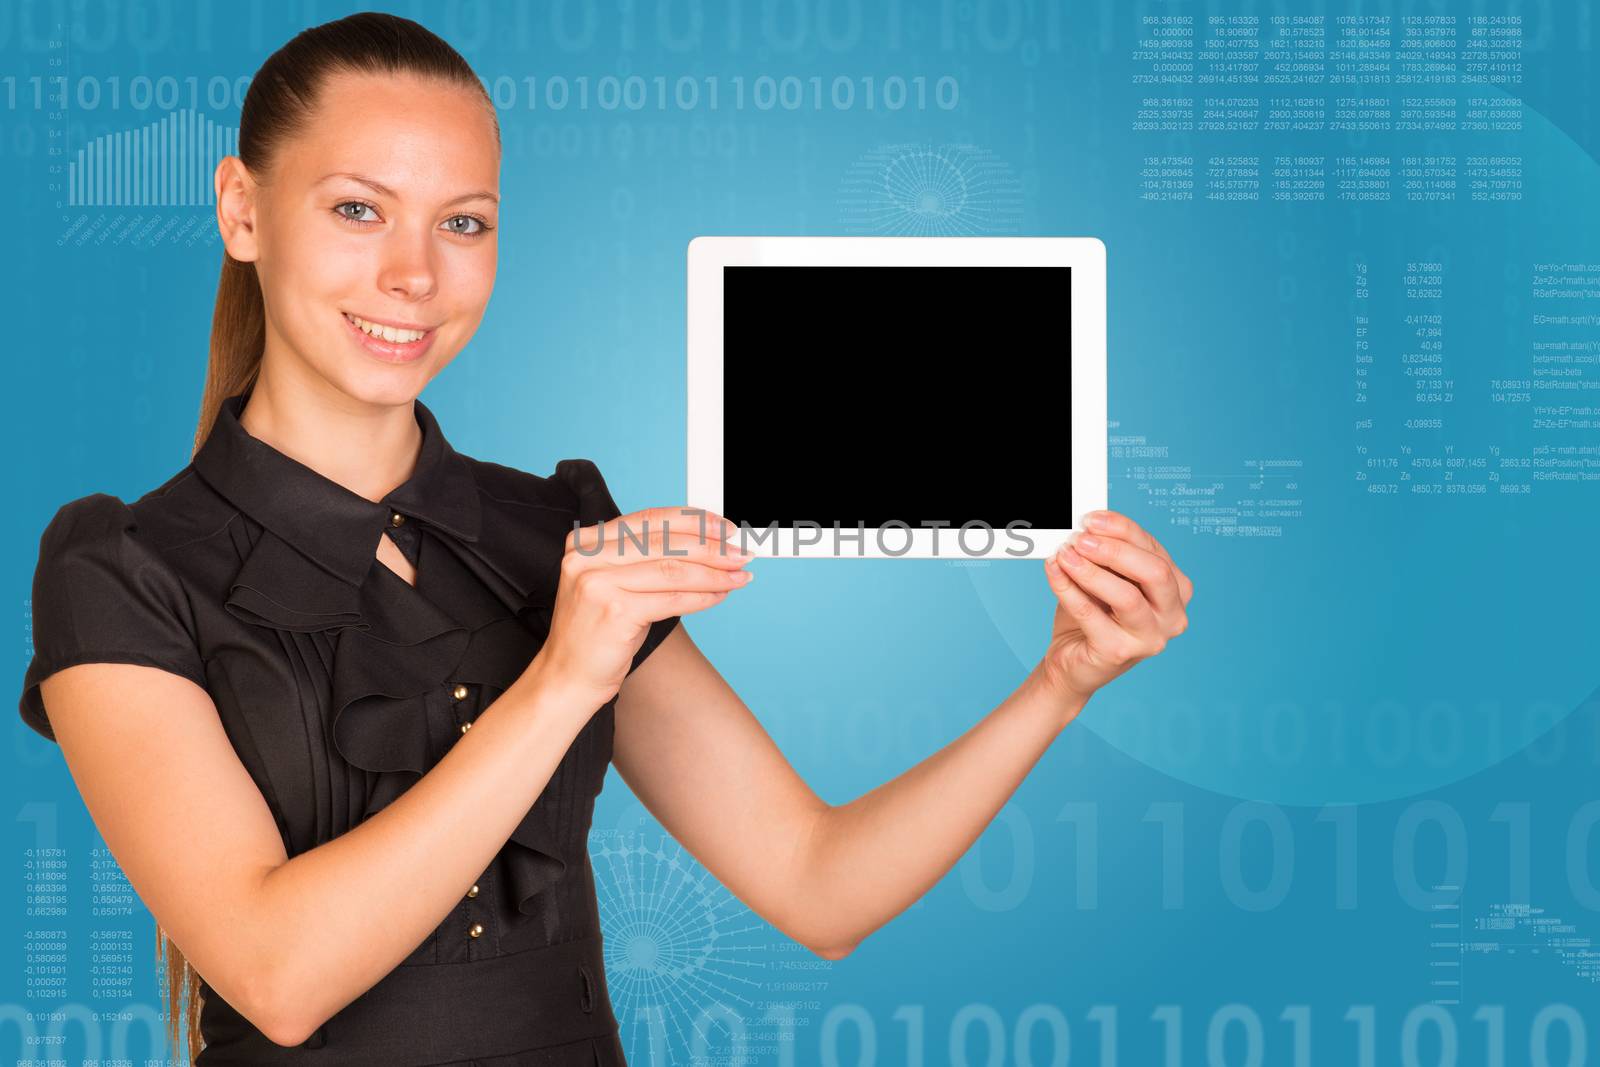 Beautiful businesswoman in dress smiling and holding tablet pc. Graphs and figures as backdrop